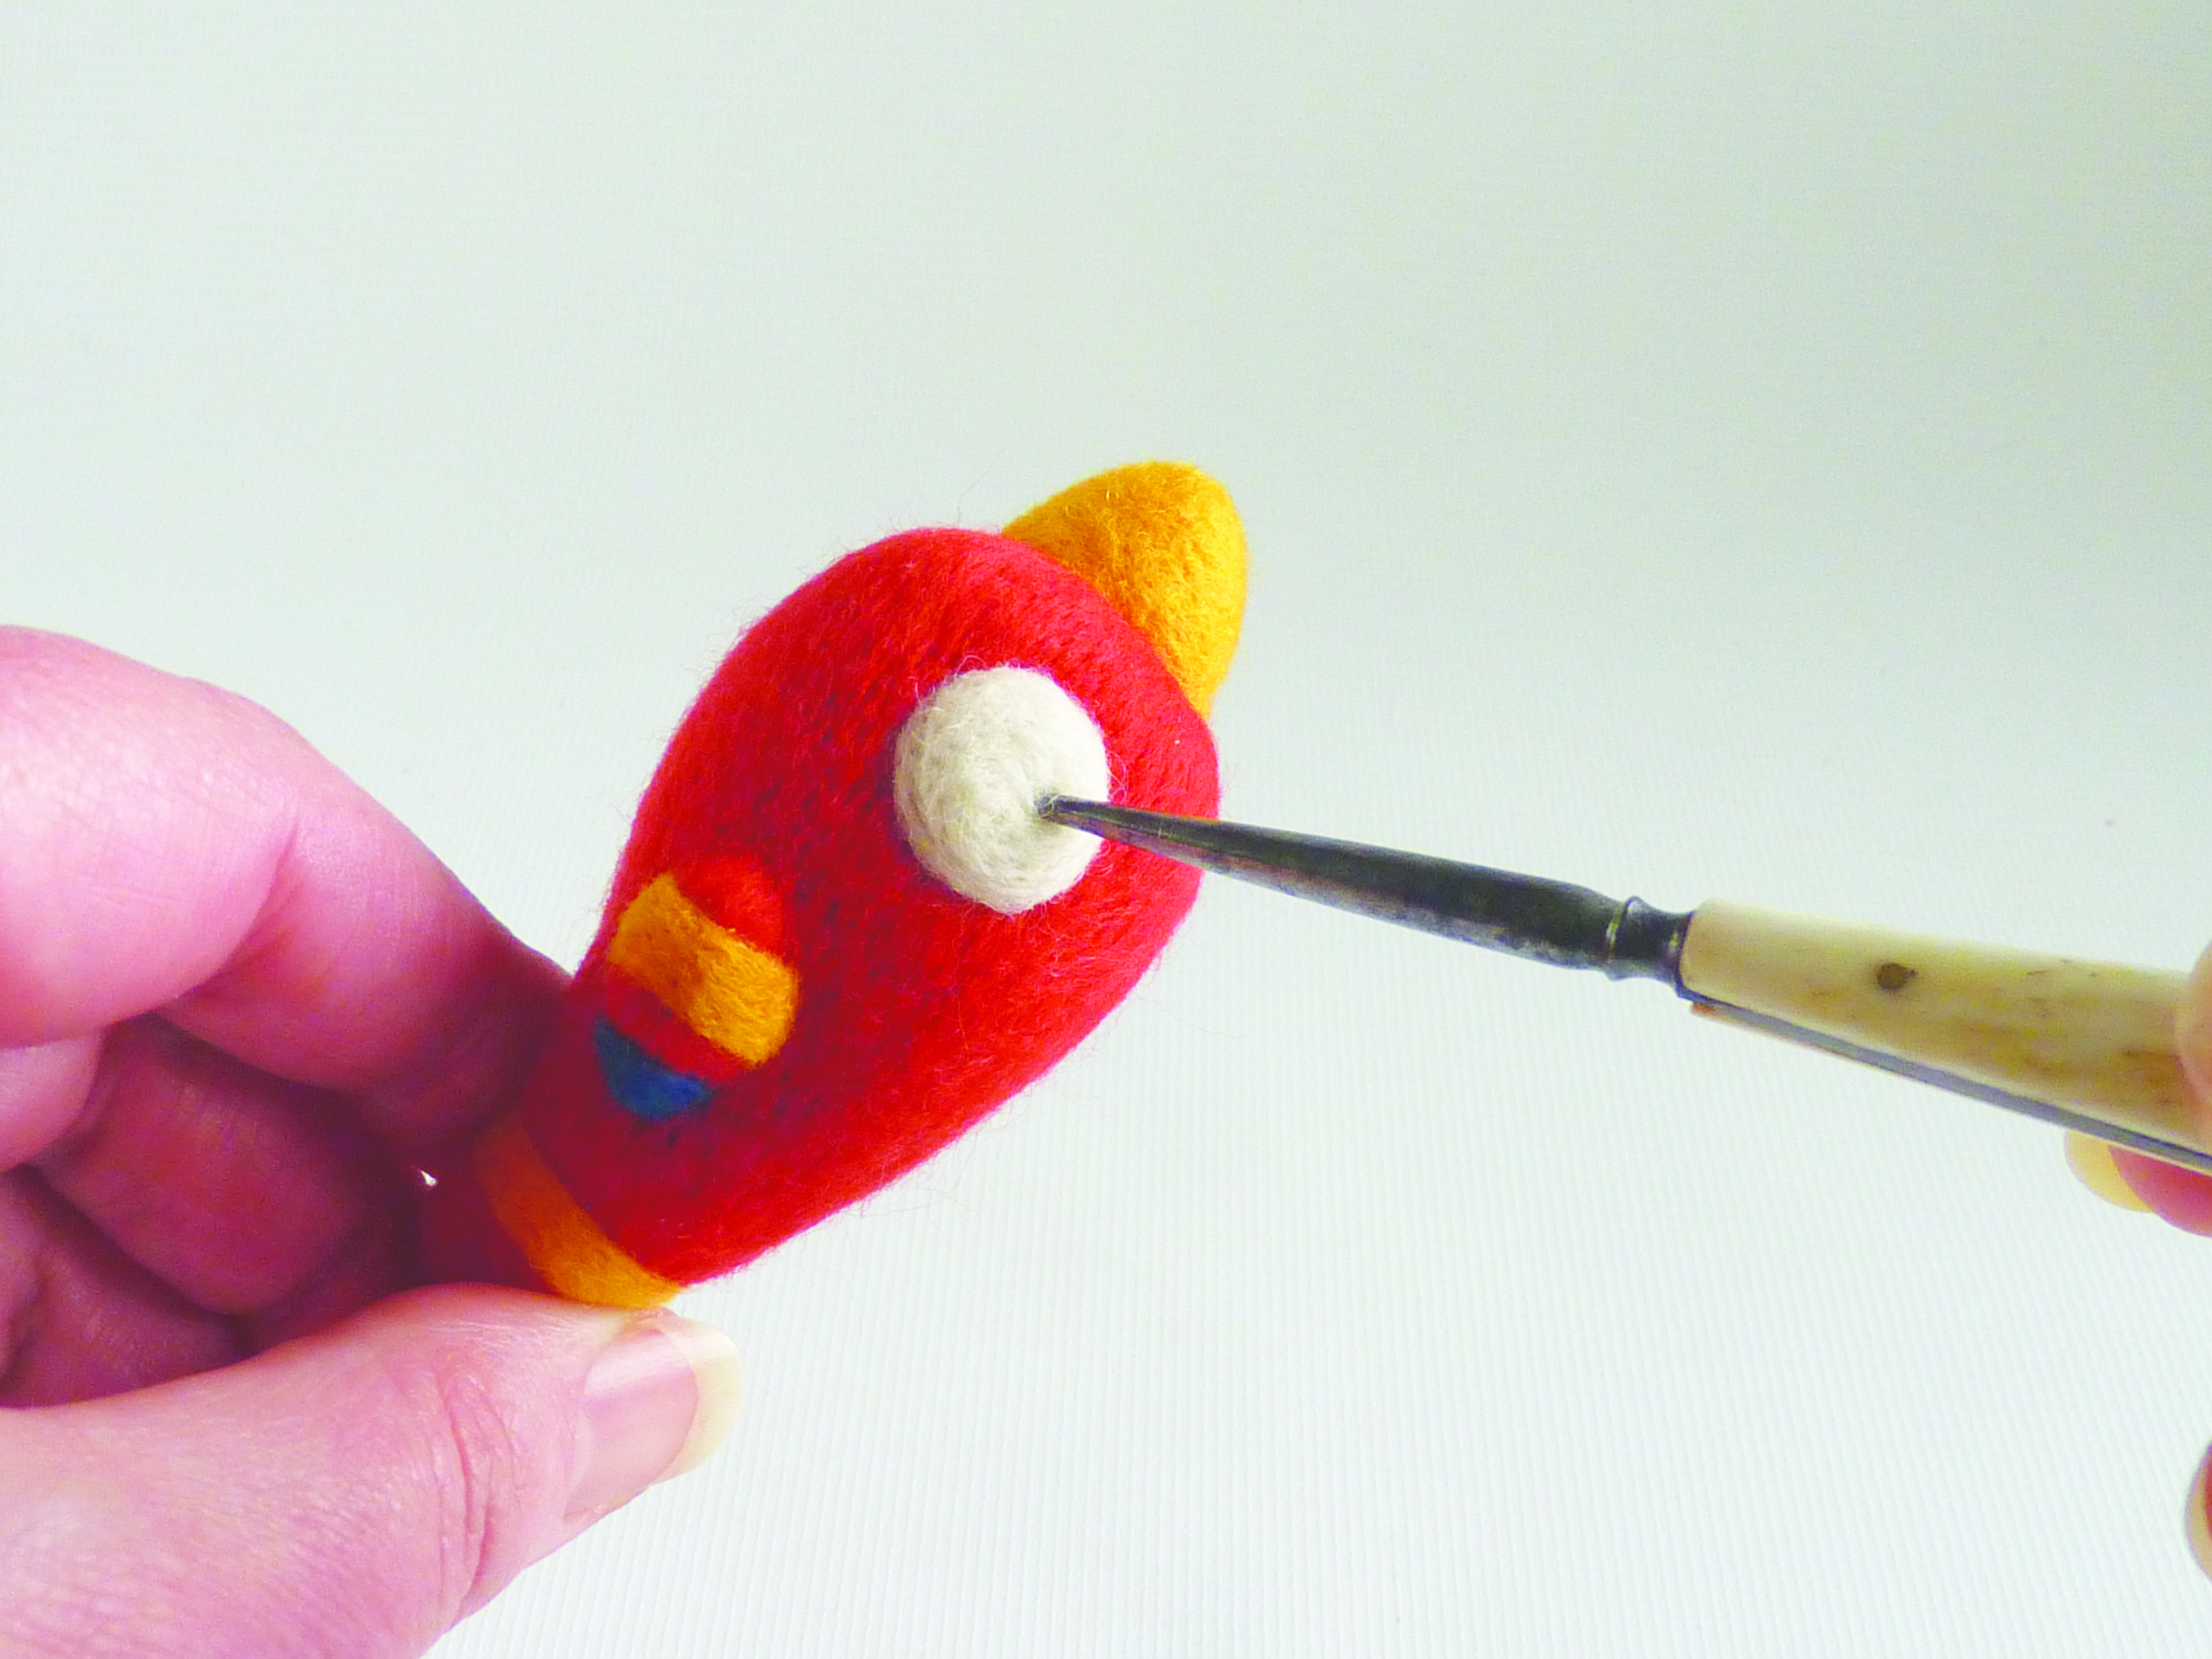 Beginner’s guide to needle felting, how to sew an eye, step 1